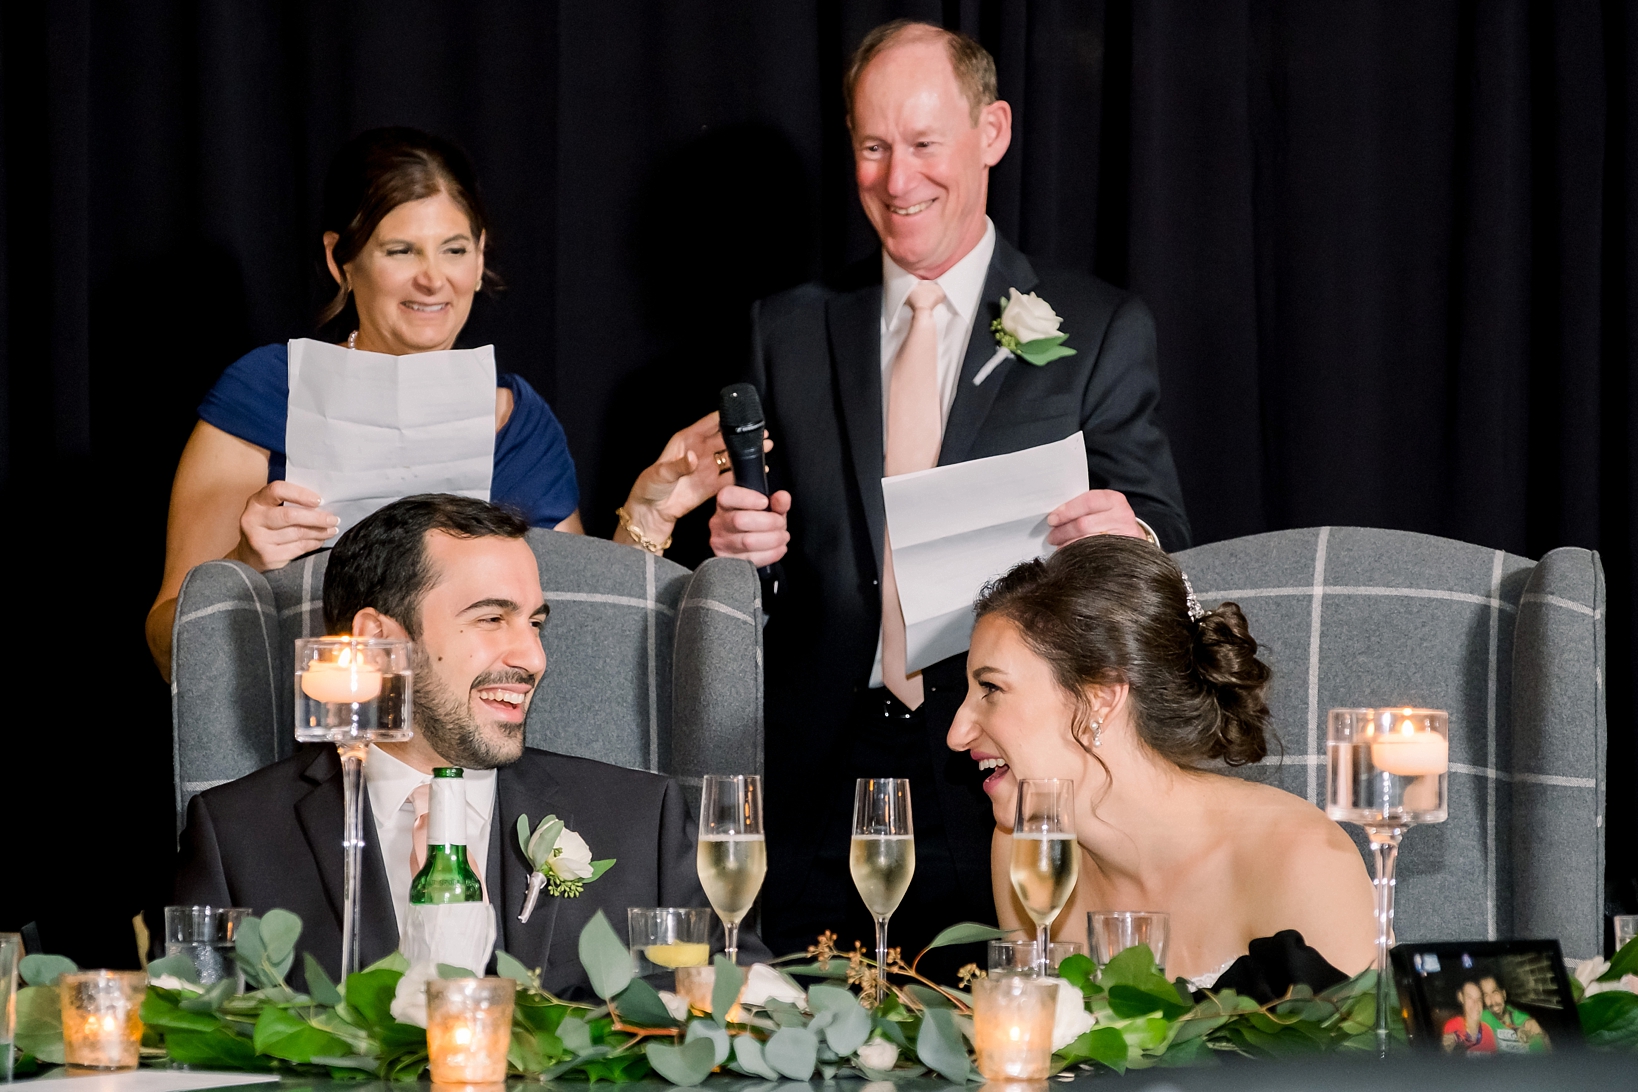 Mom and Dad give a hilarious speech during the reception for their Daughter and Son in law